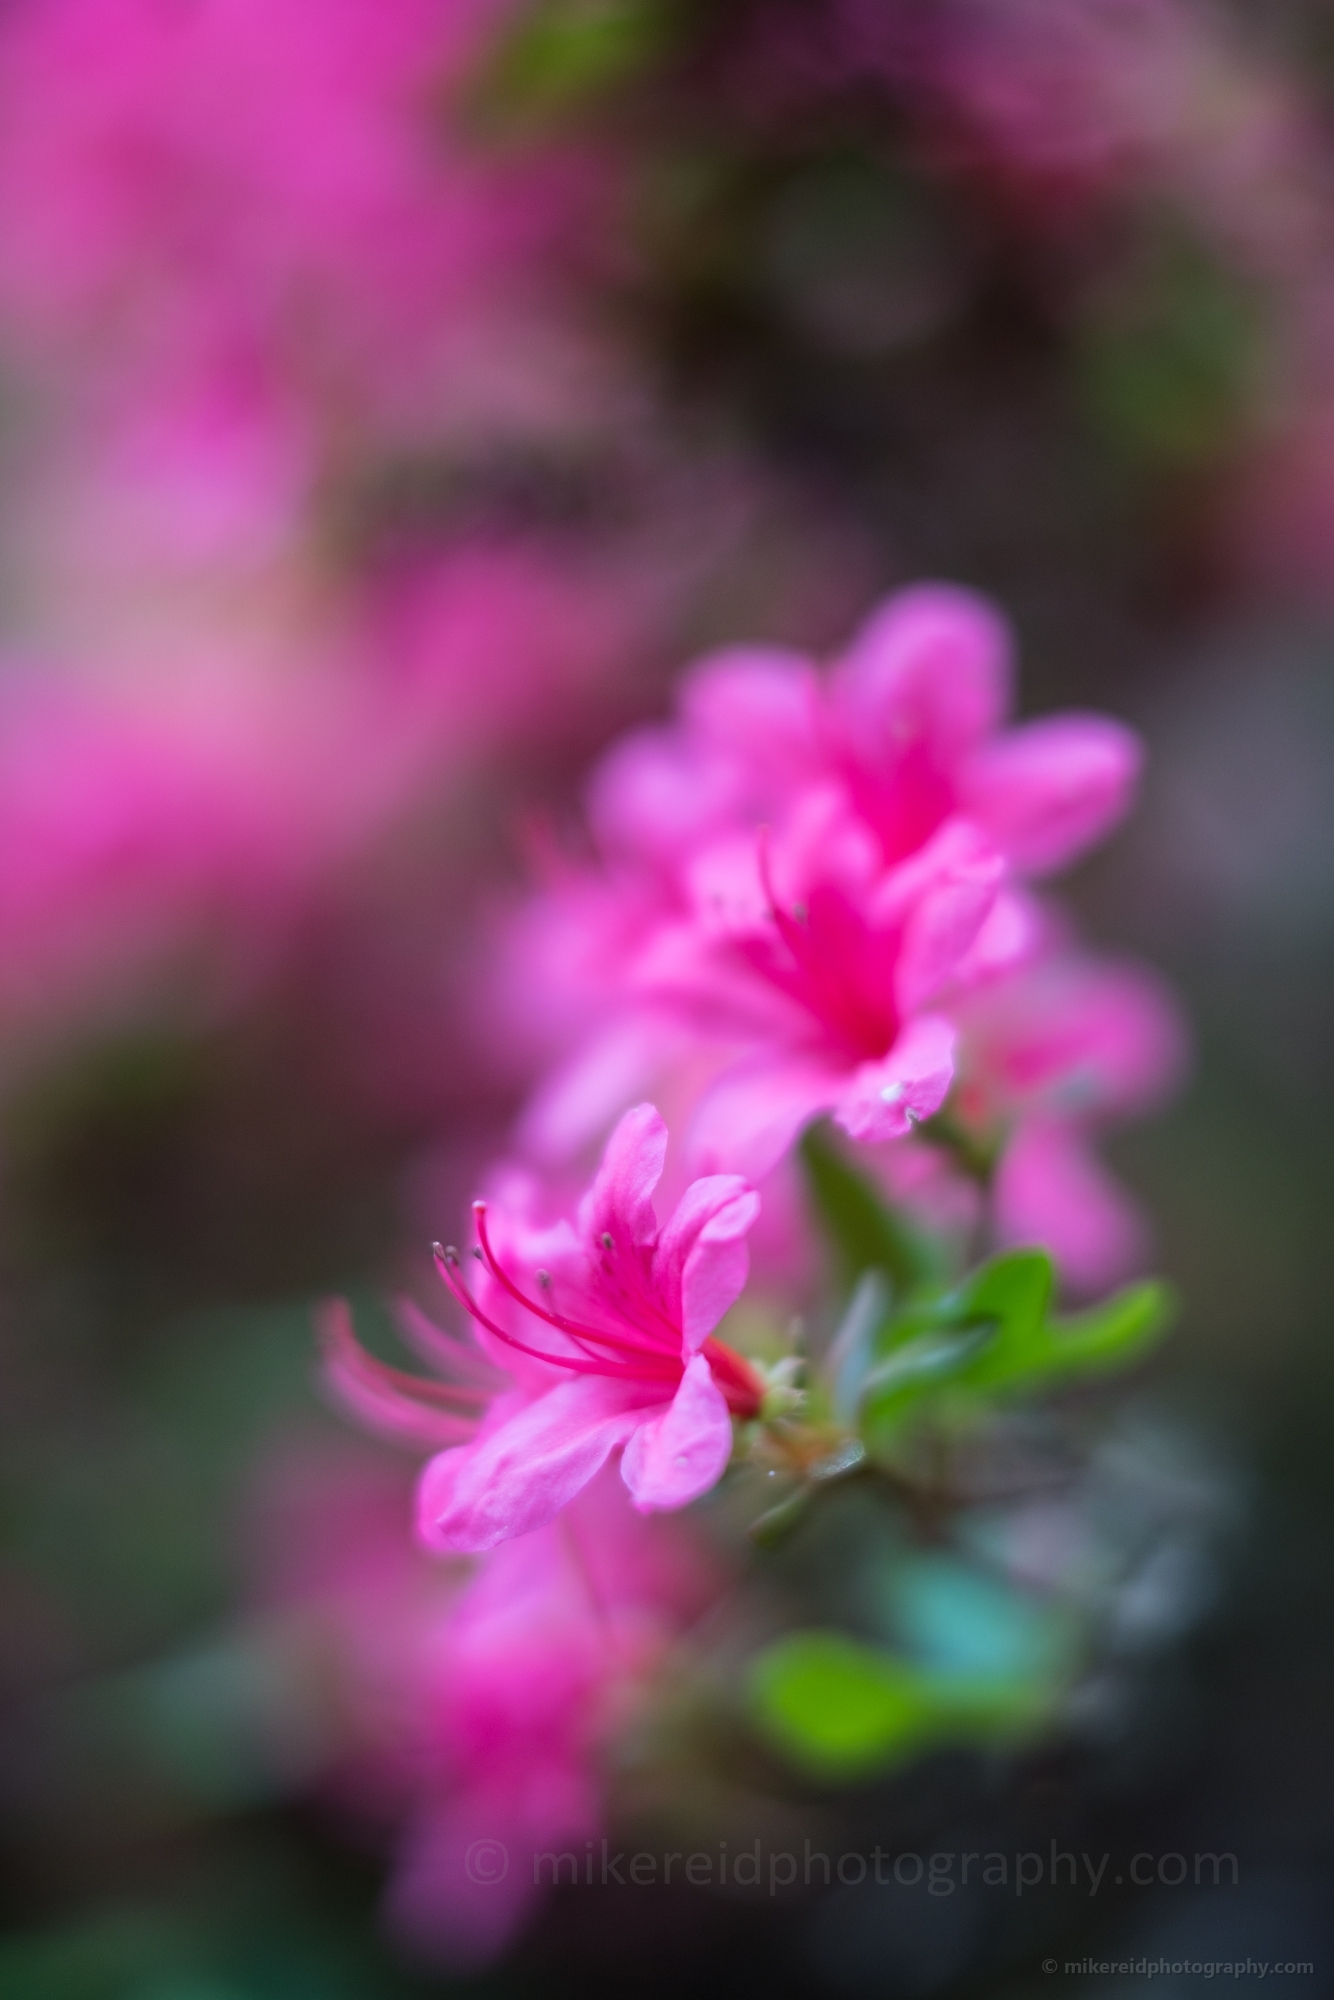 Rhododendron and Azaleas Photography Pink and Flowers.jpg 